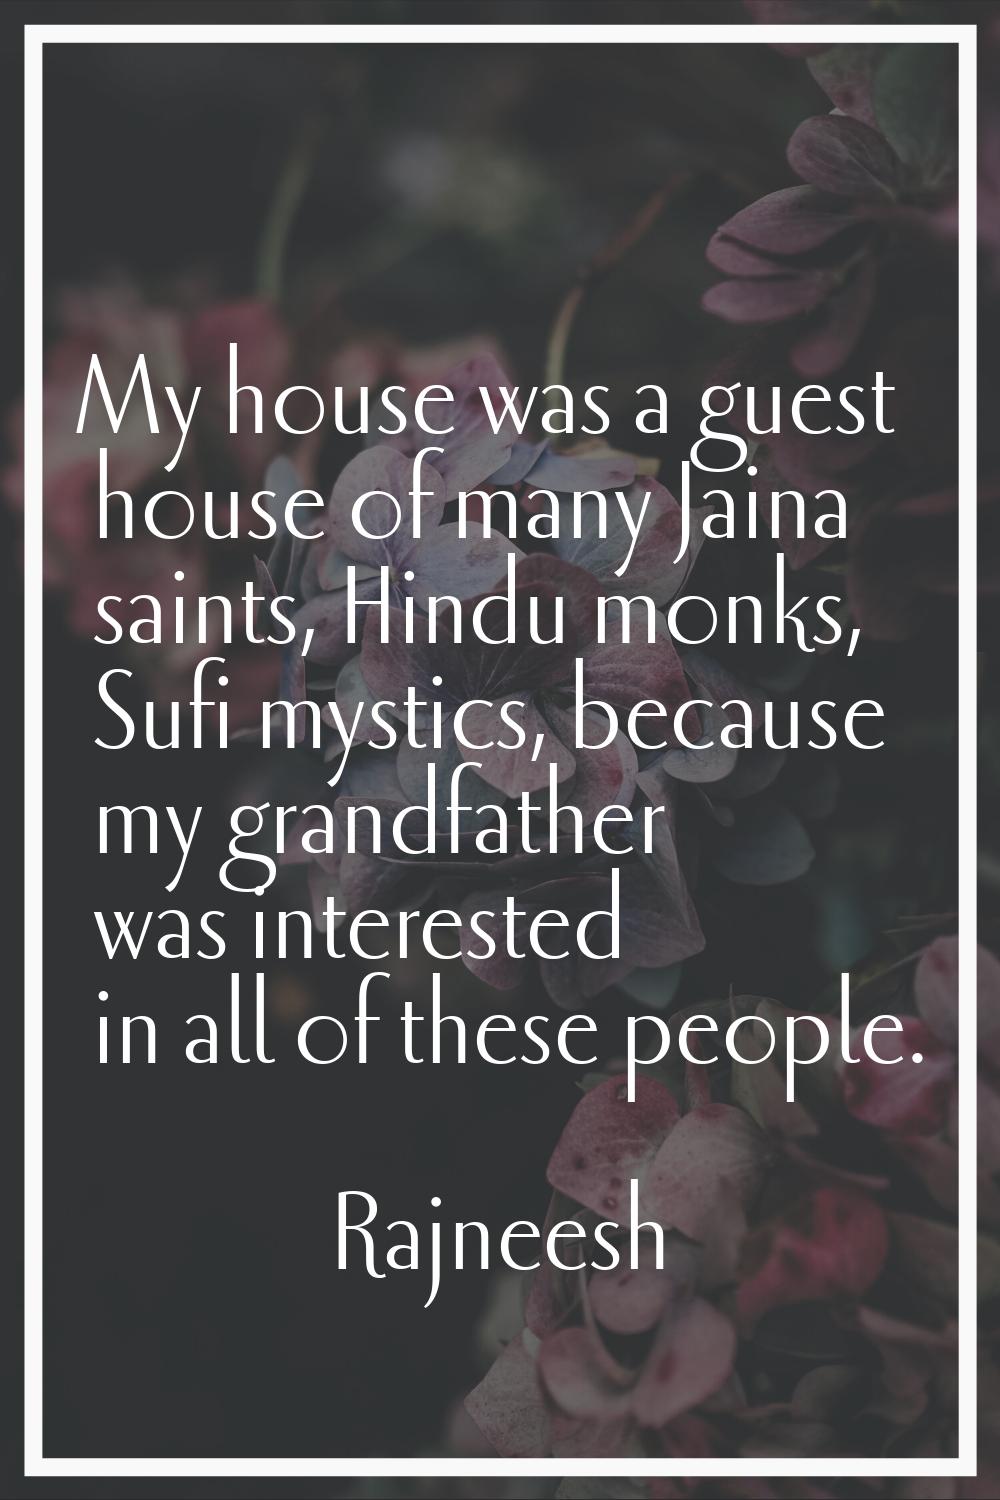 My house was a guest house of many Jaina saints, Hindu monks, Sufi mystics, because my grandfather 